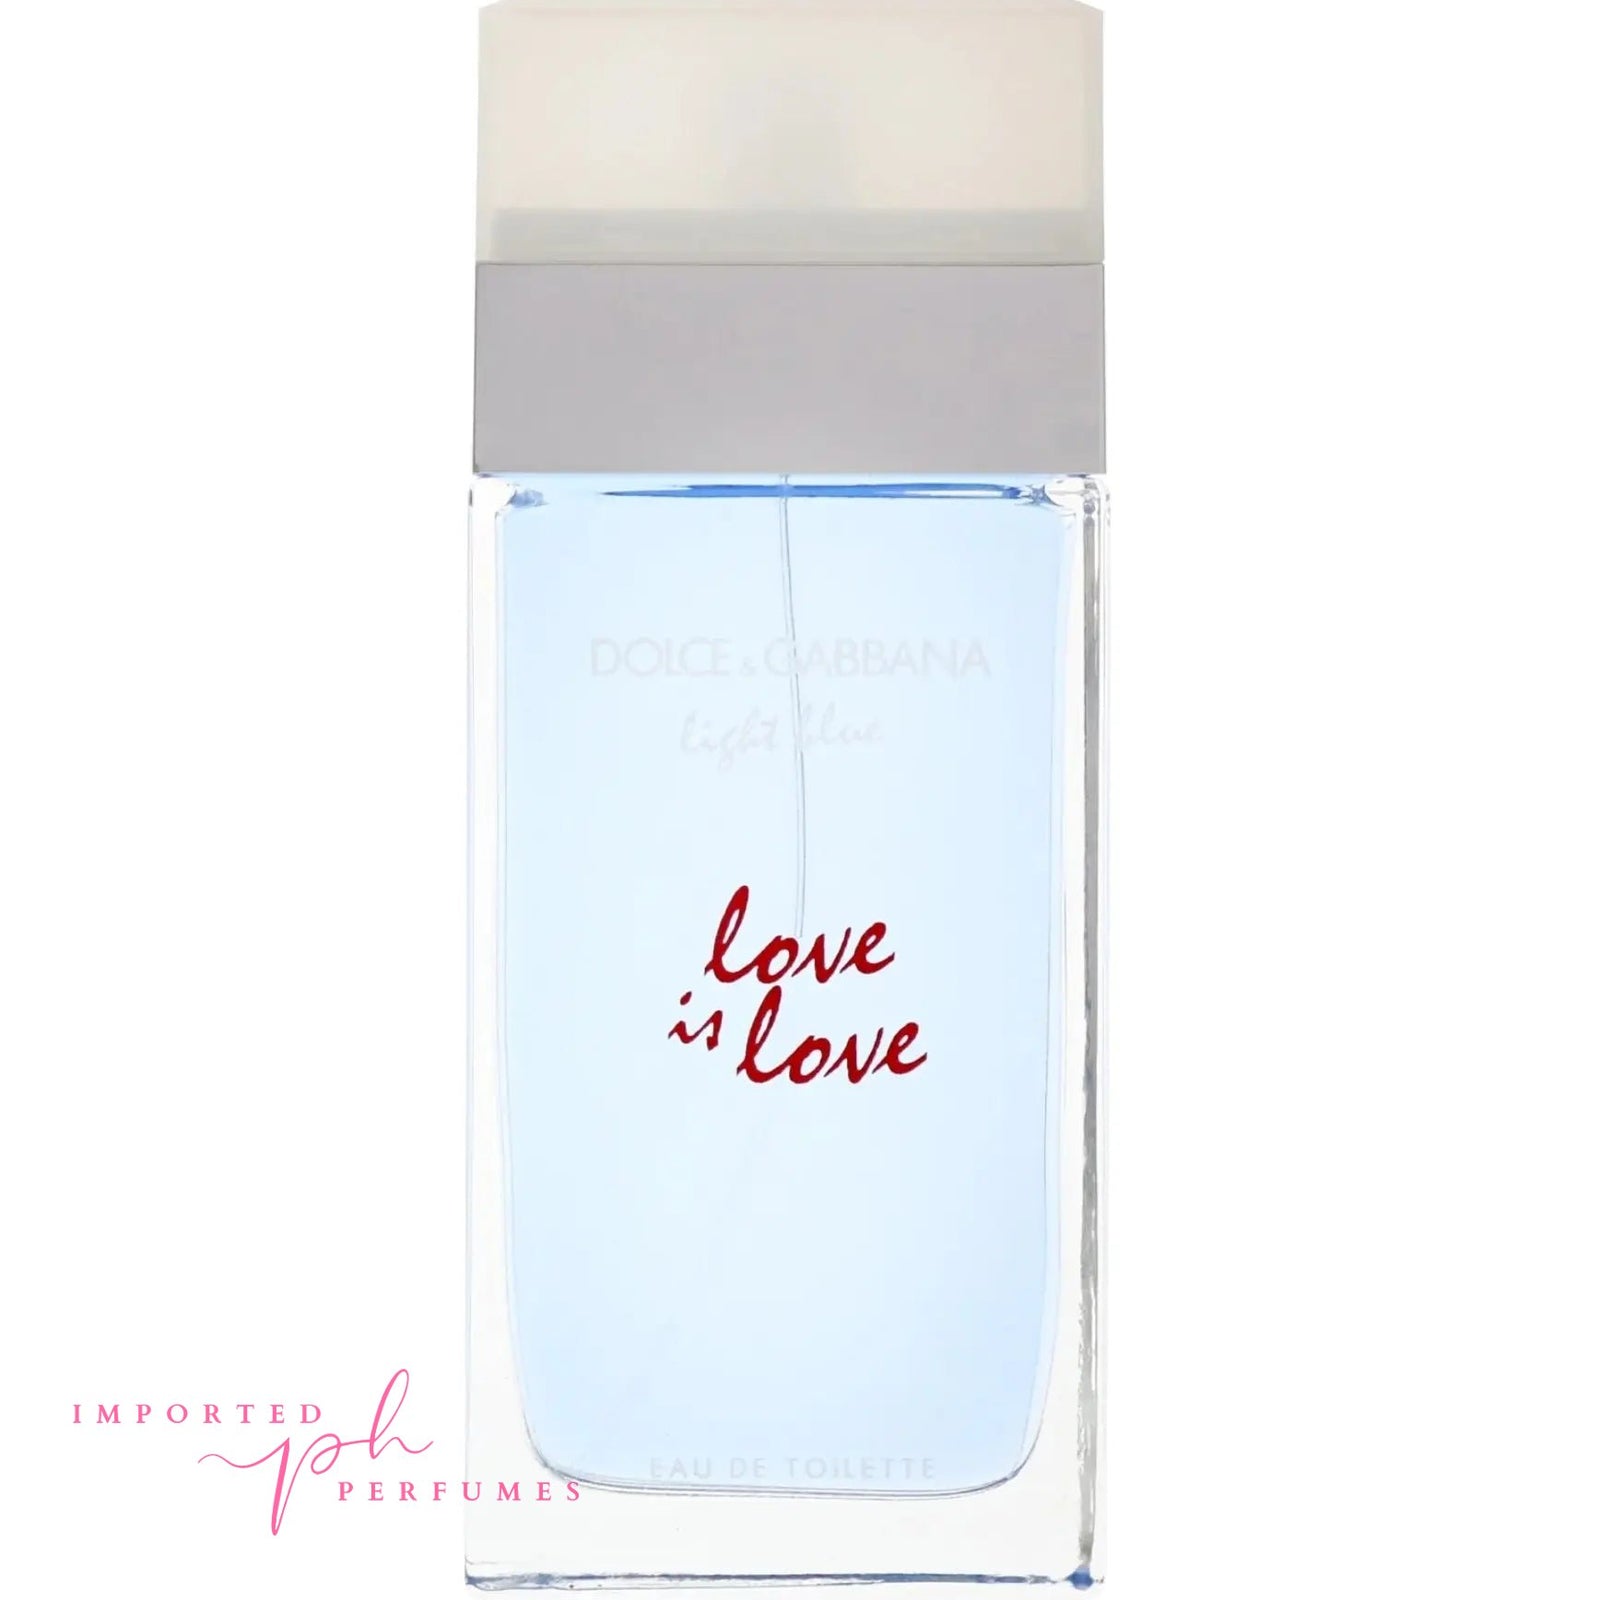 Dolce & Gabbana Light Blue Love is Love for Women 100ml EDT Imported Perfumes & Beauty Store